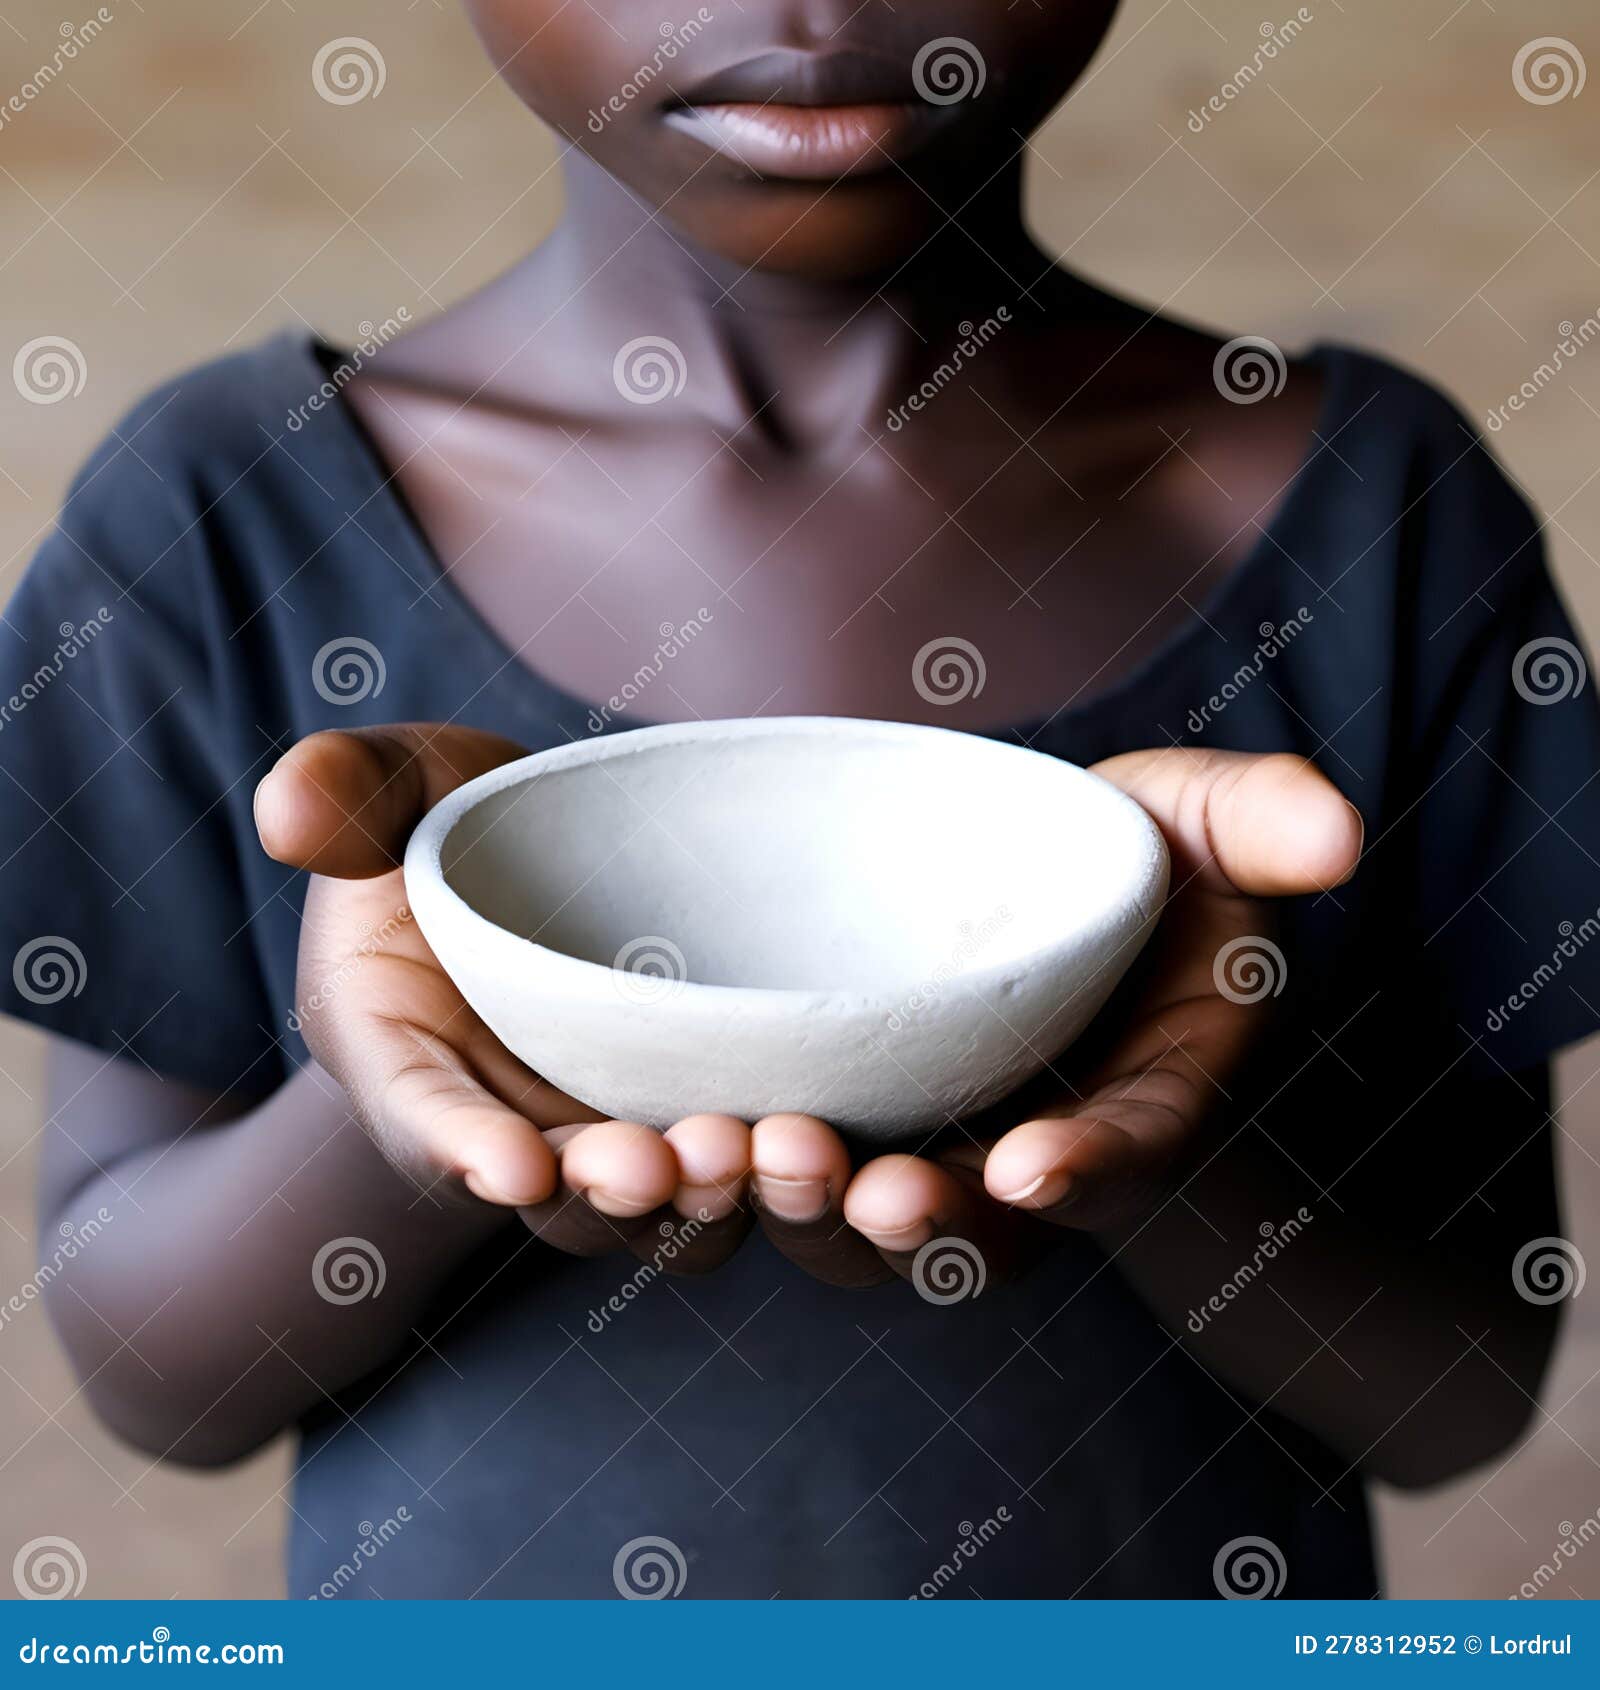 close-up of a young child holding a bowl in his hands. poverty